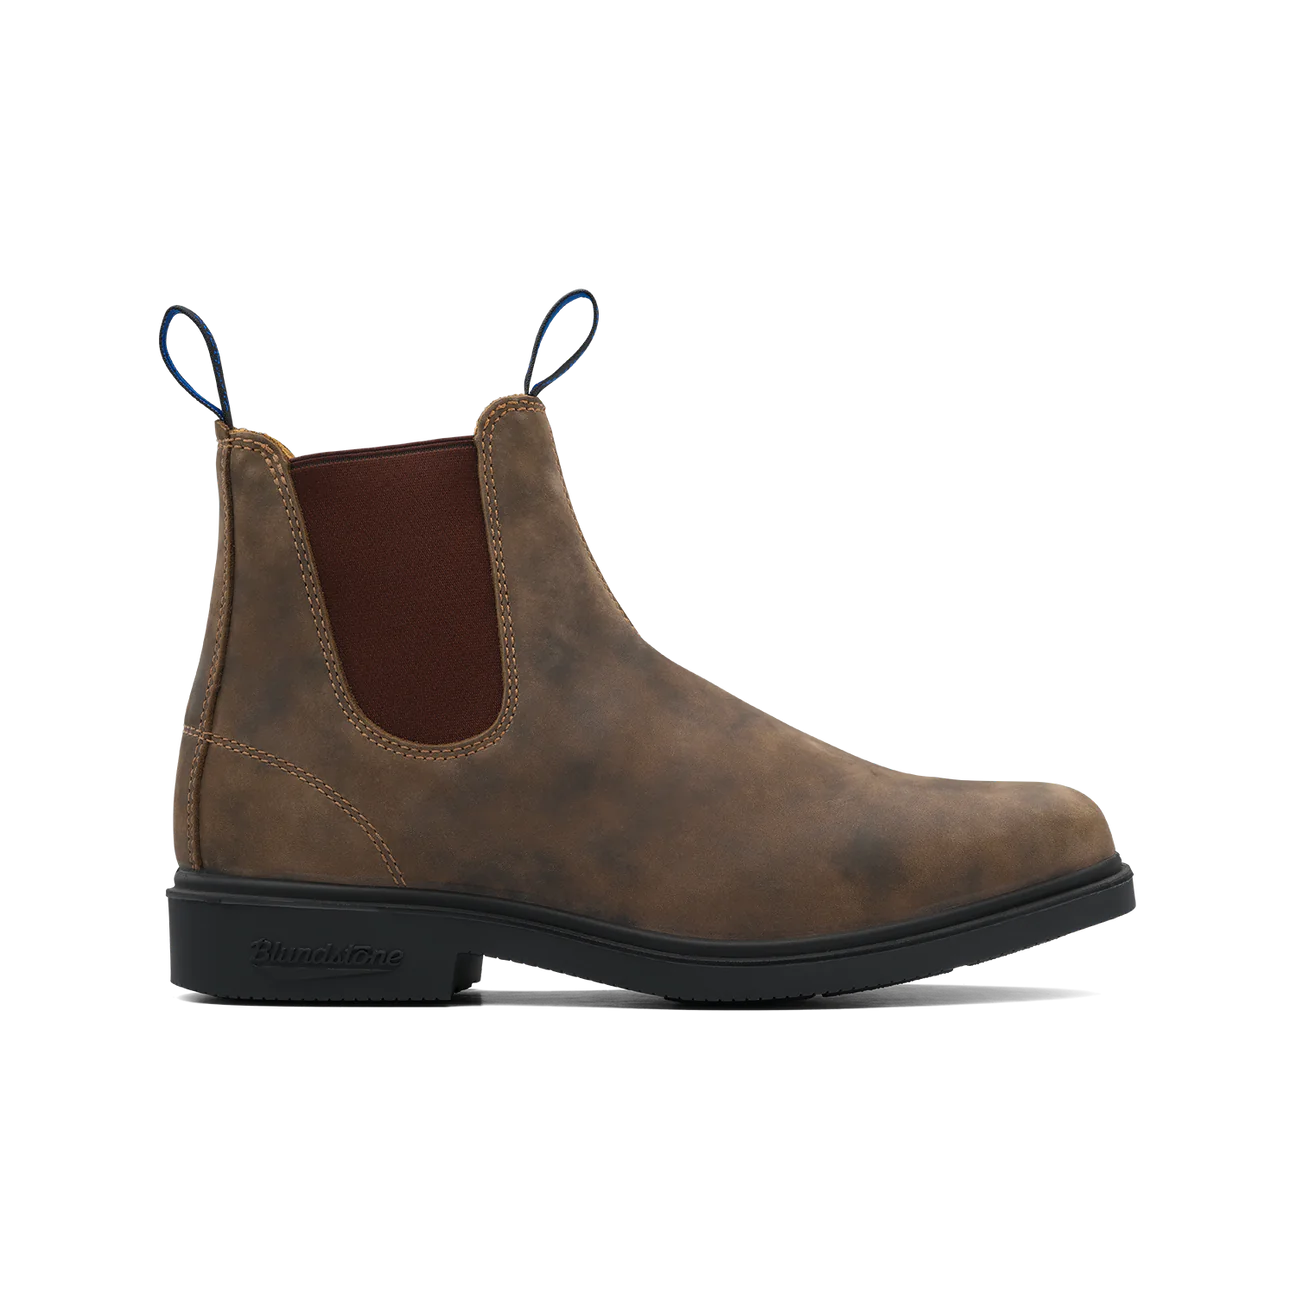 Blundstone 1391 Winter Thermal Dress Boots